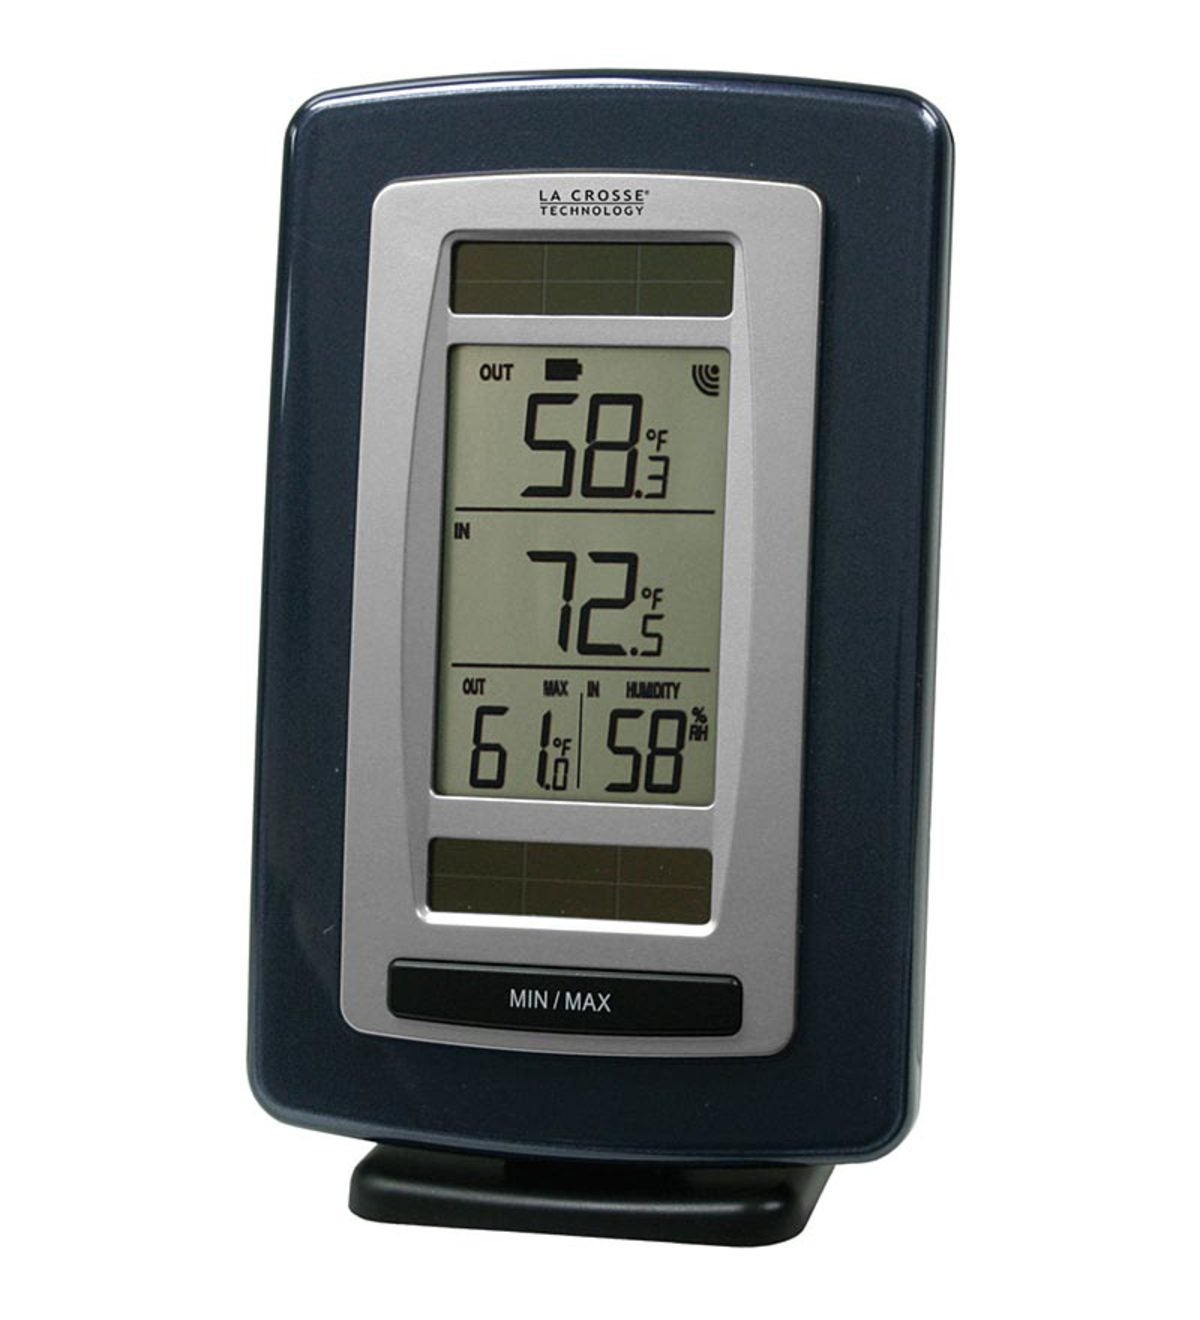 Solar Powered Wireless Temperature Station and Sensor by La Cross Technology